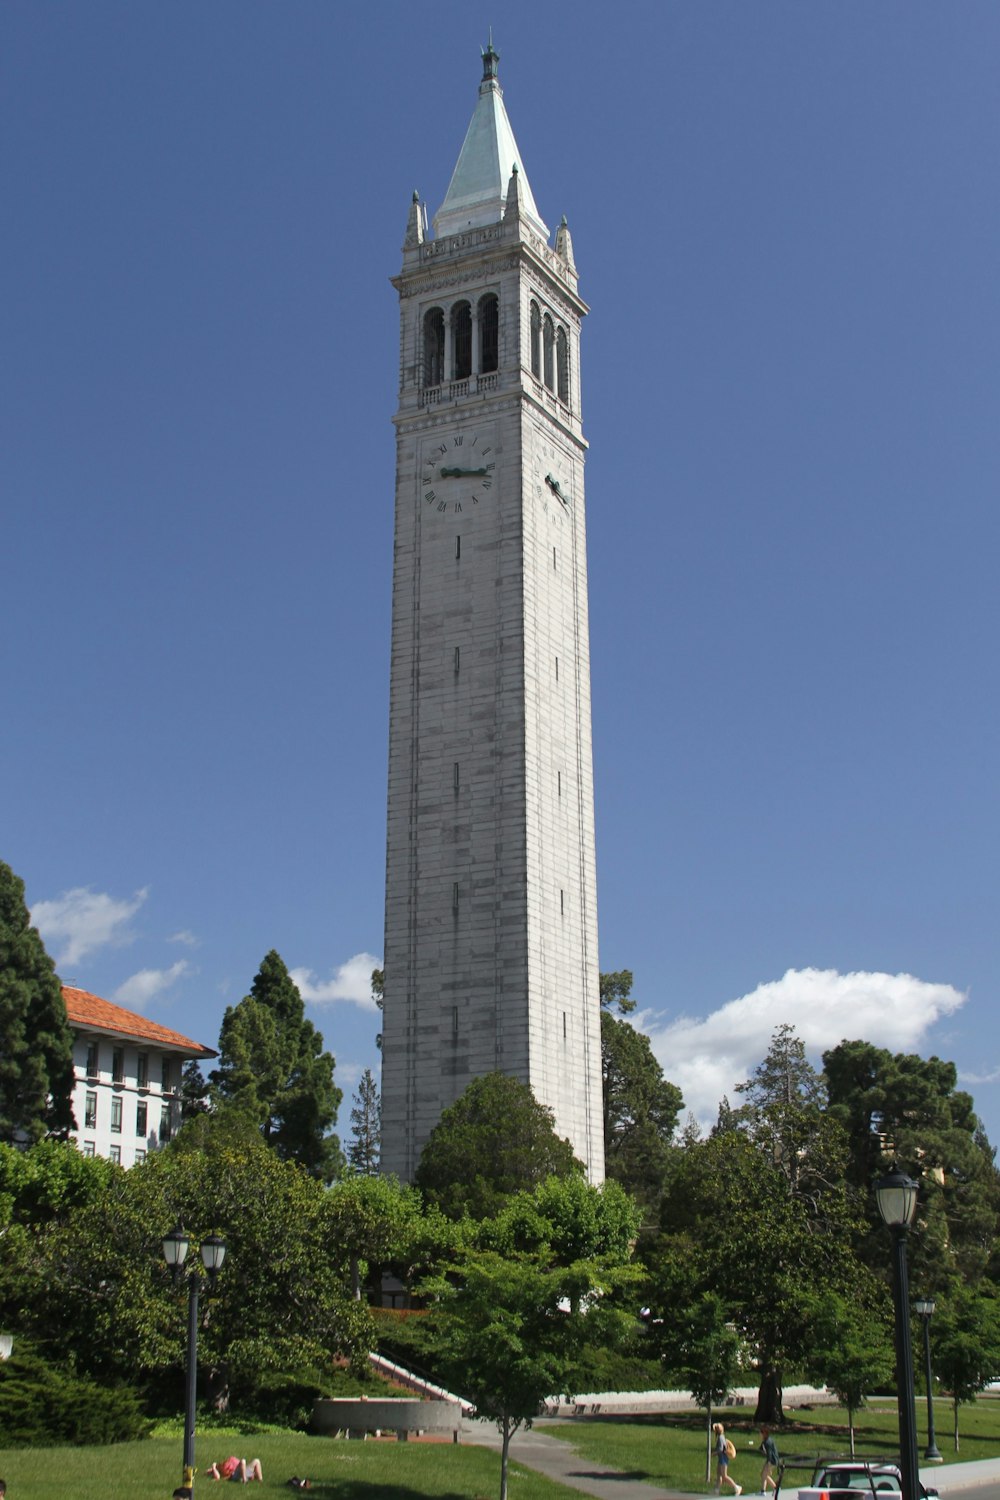 a tall clock tower towering over a lush green park